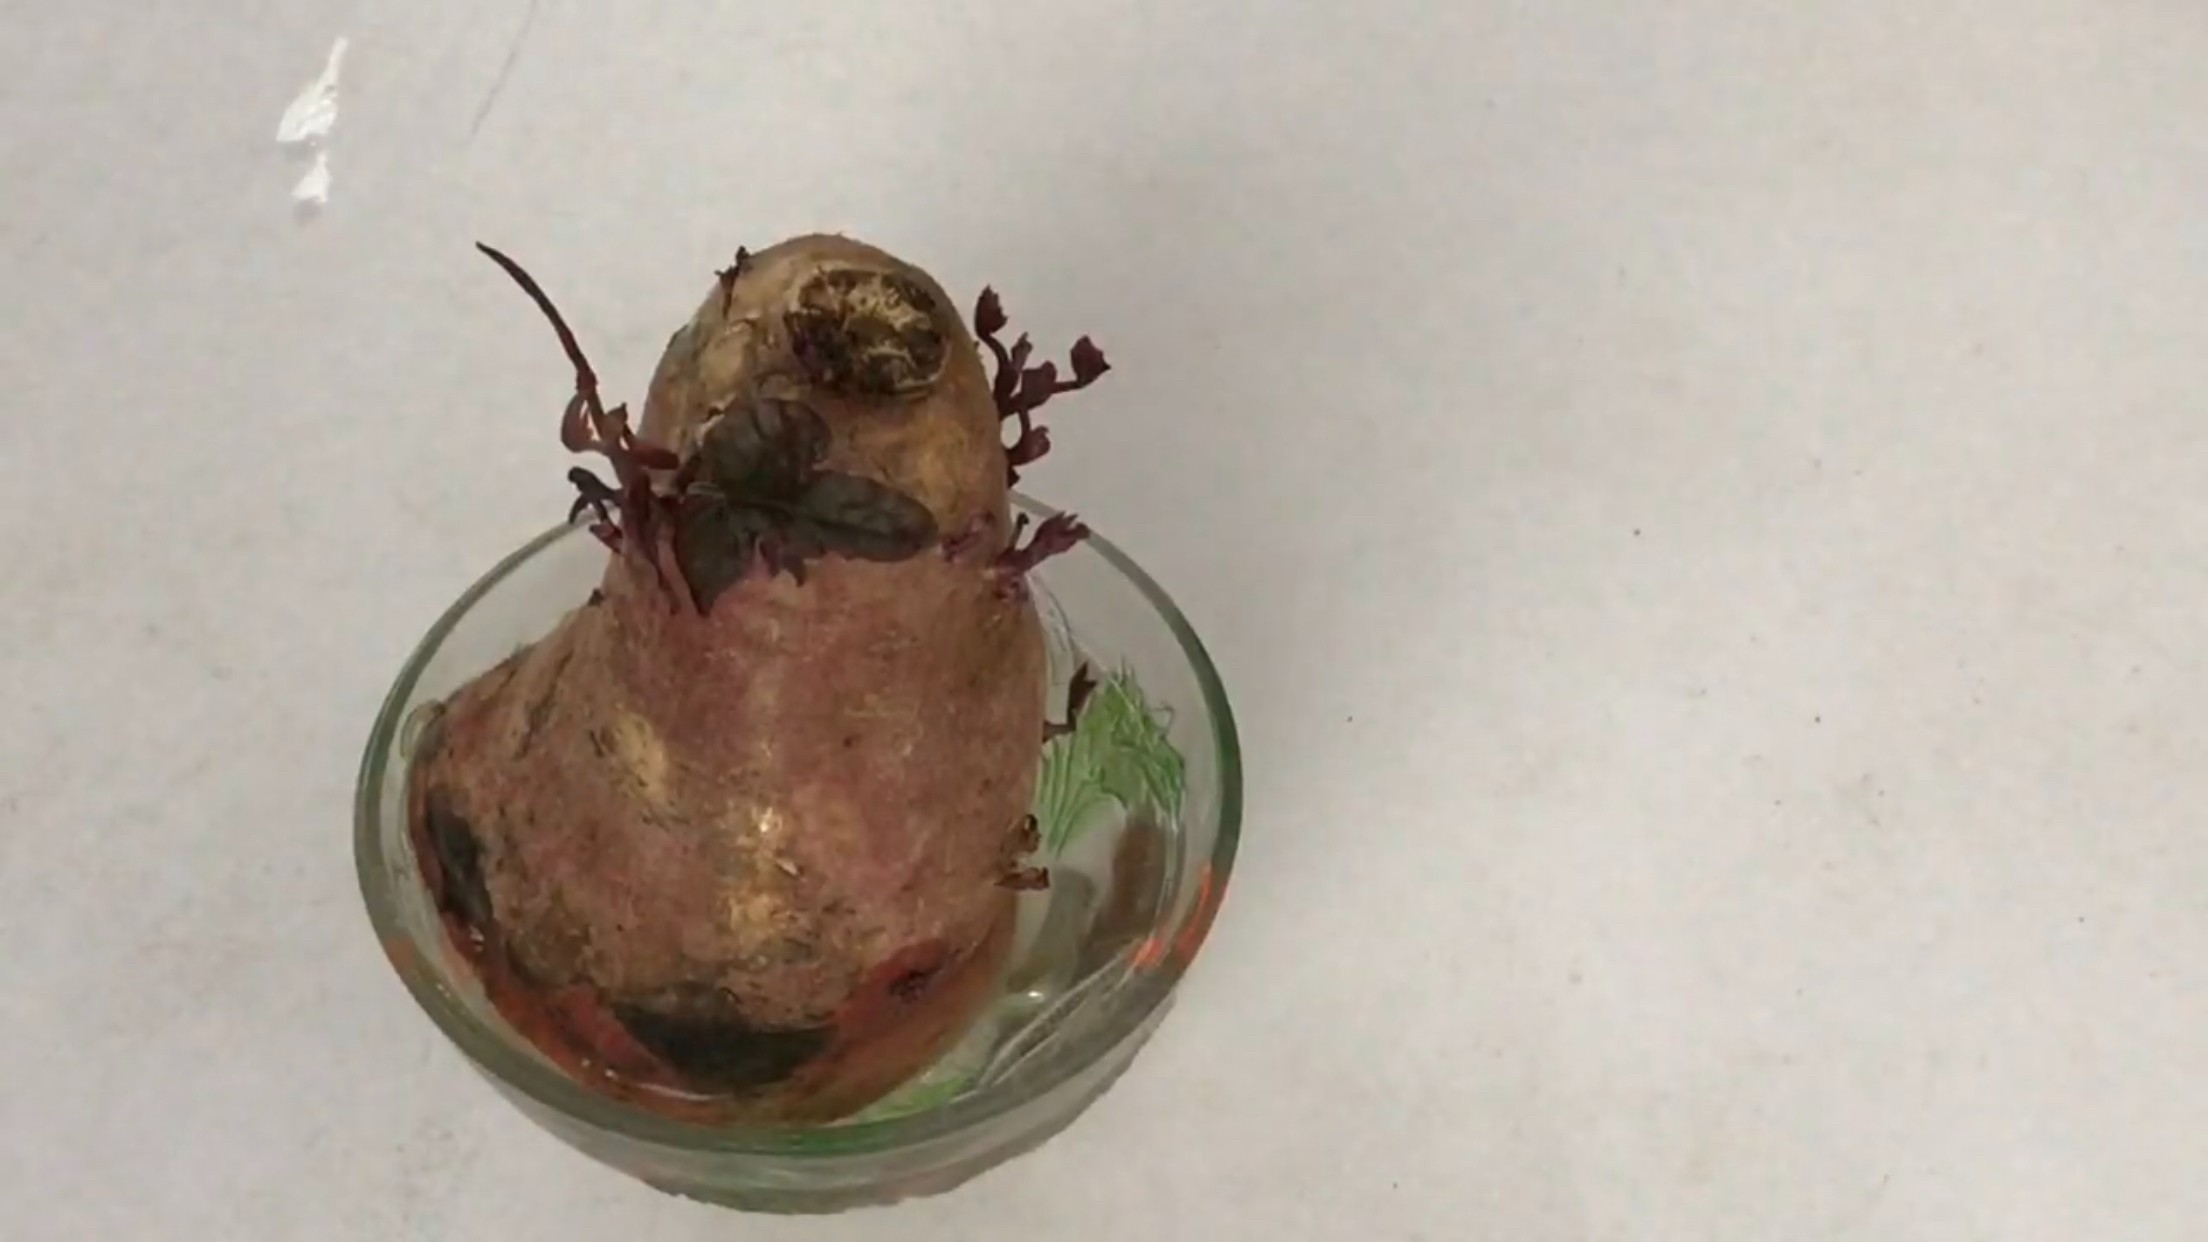 Leaves sprouting from sweet potatoes